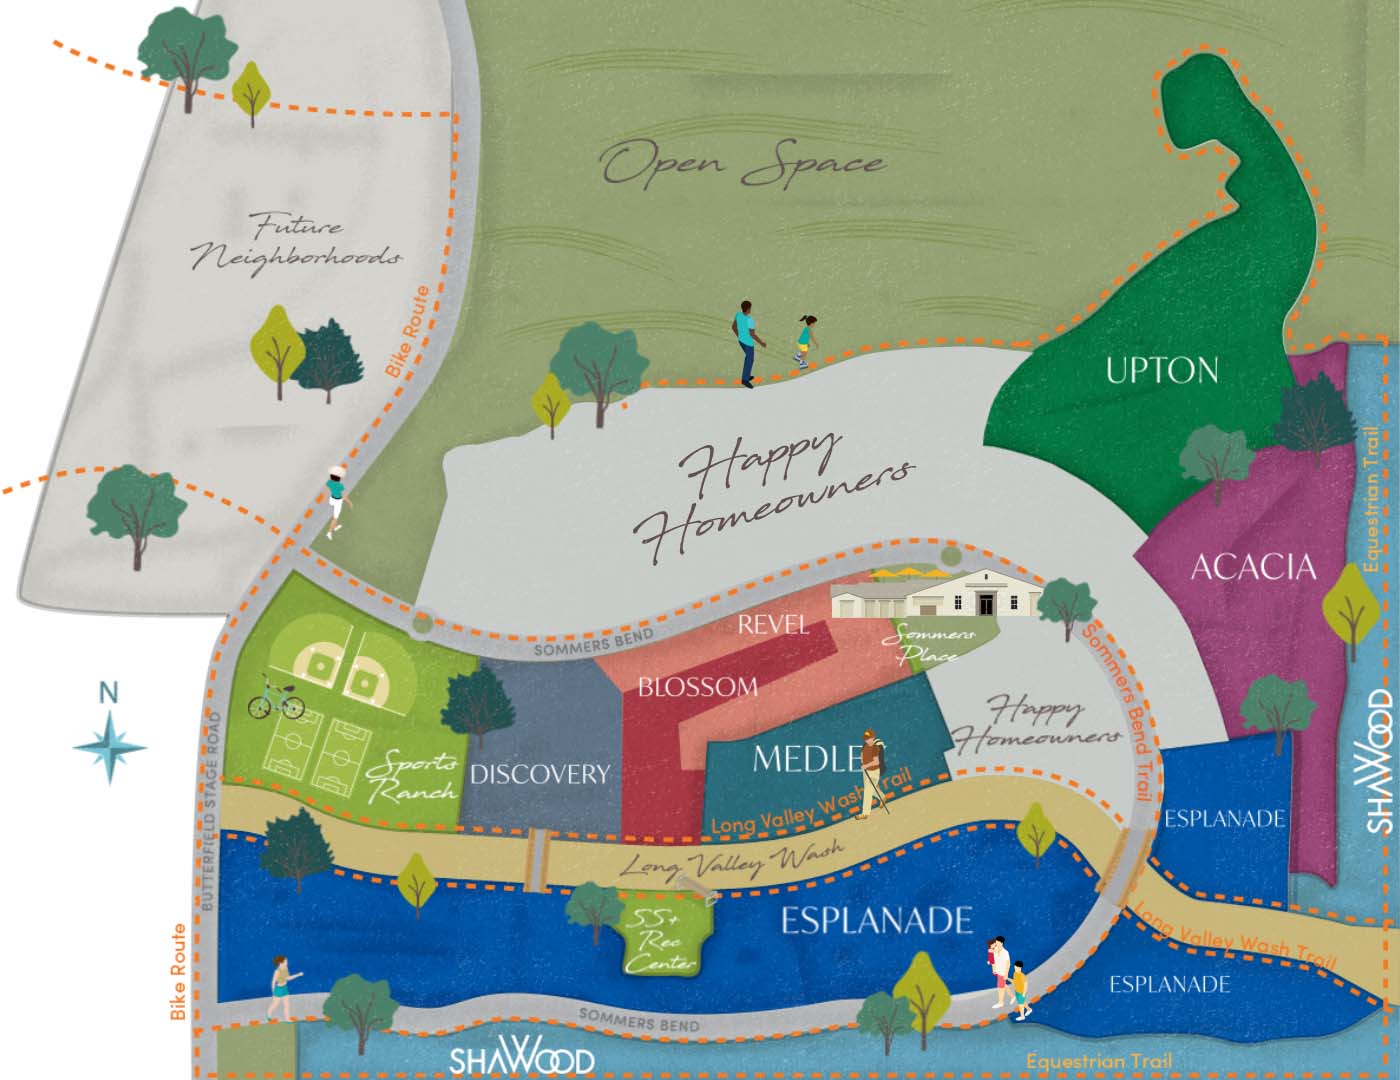 Sommers Bend Site Map